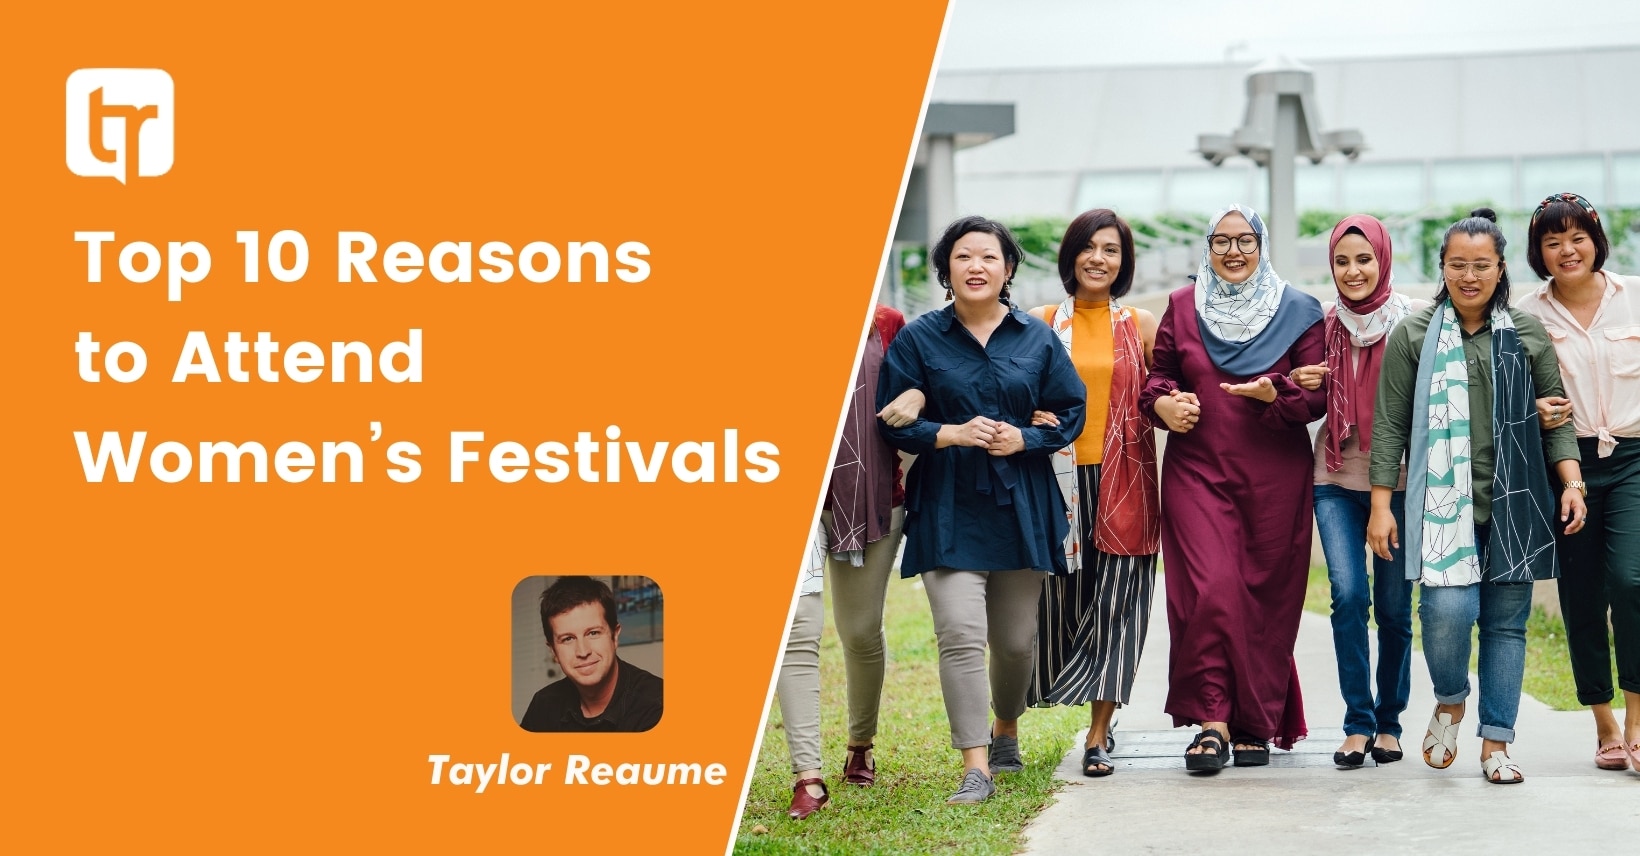 Top 10 Reasons to Attend Women’s Festivals